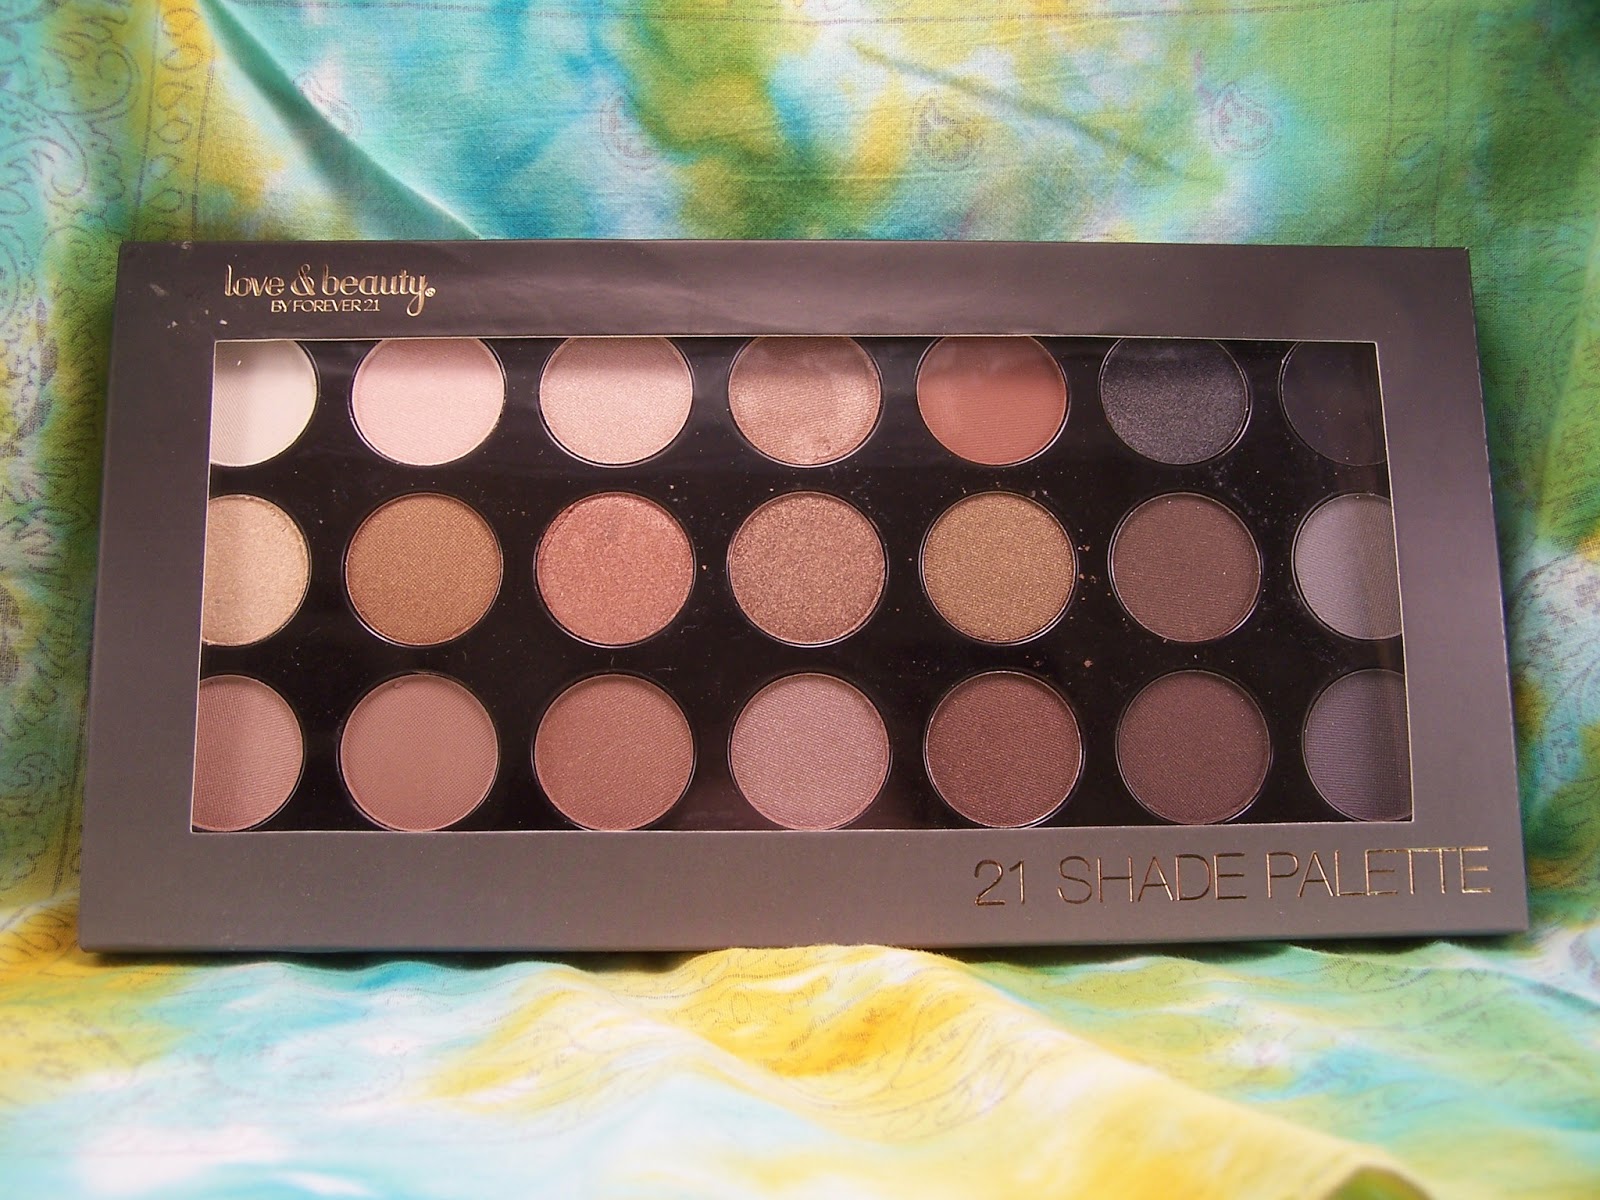 Forever 21 Love & Beauty Brown/Taupe Eyeshadow Palette